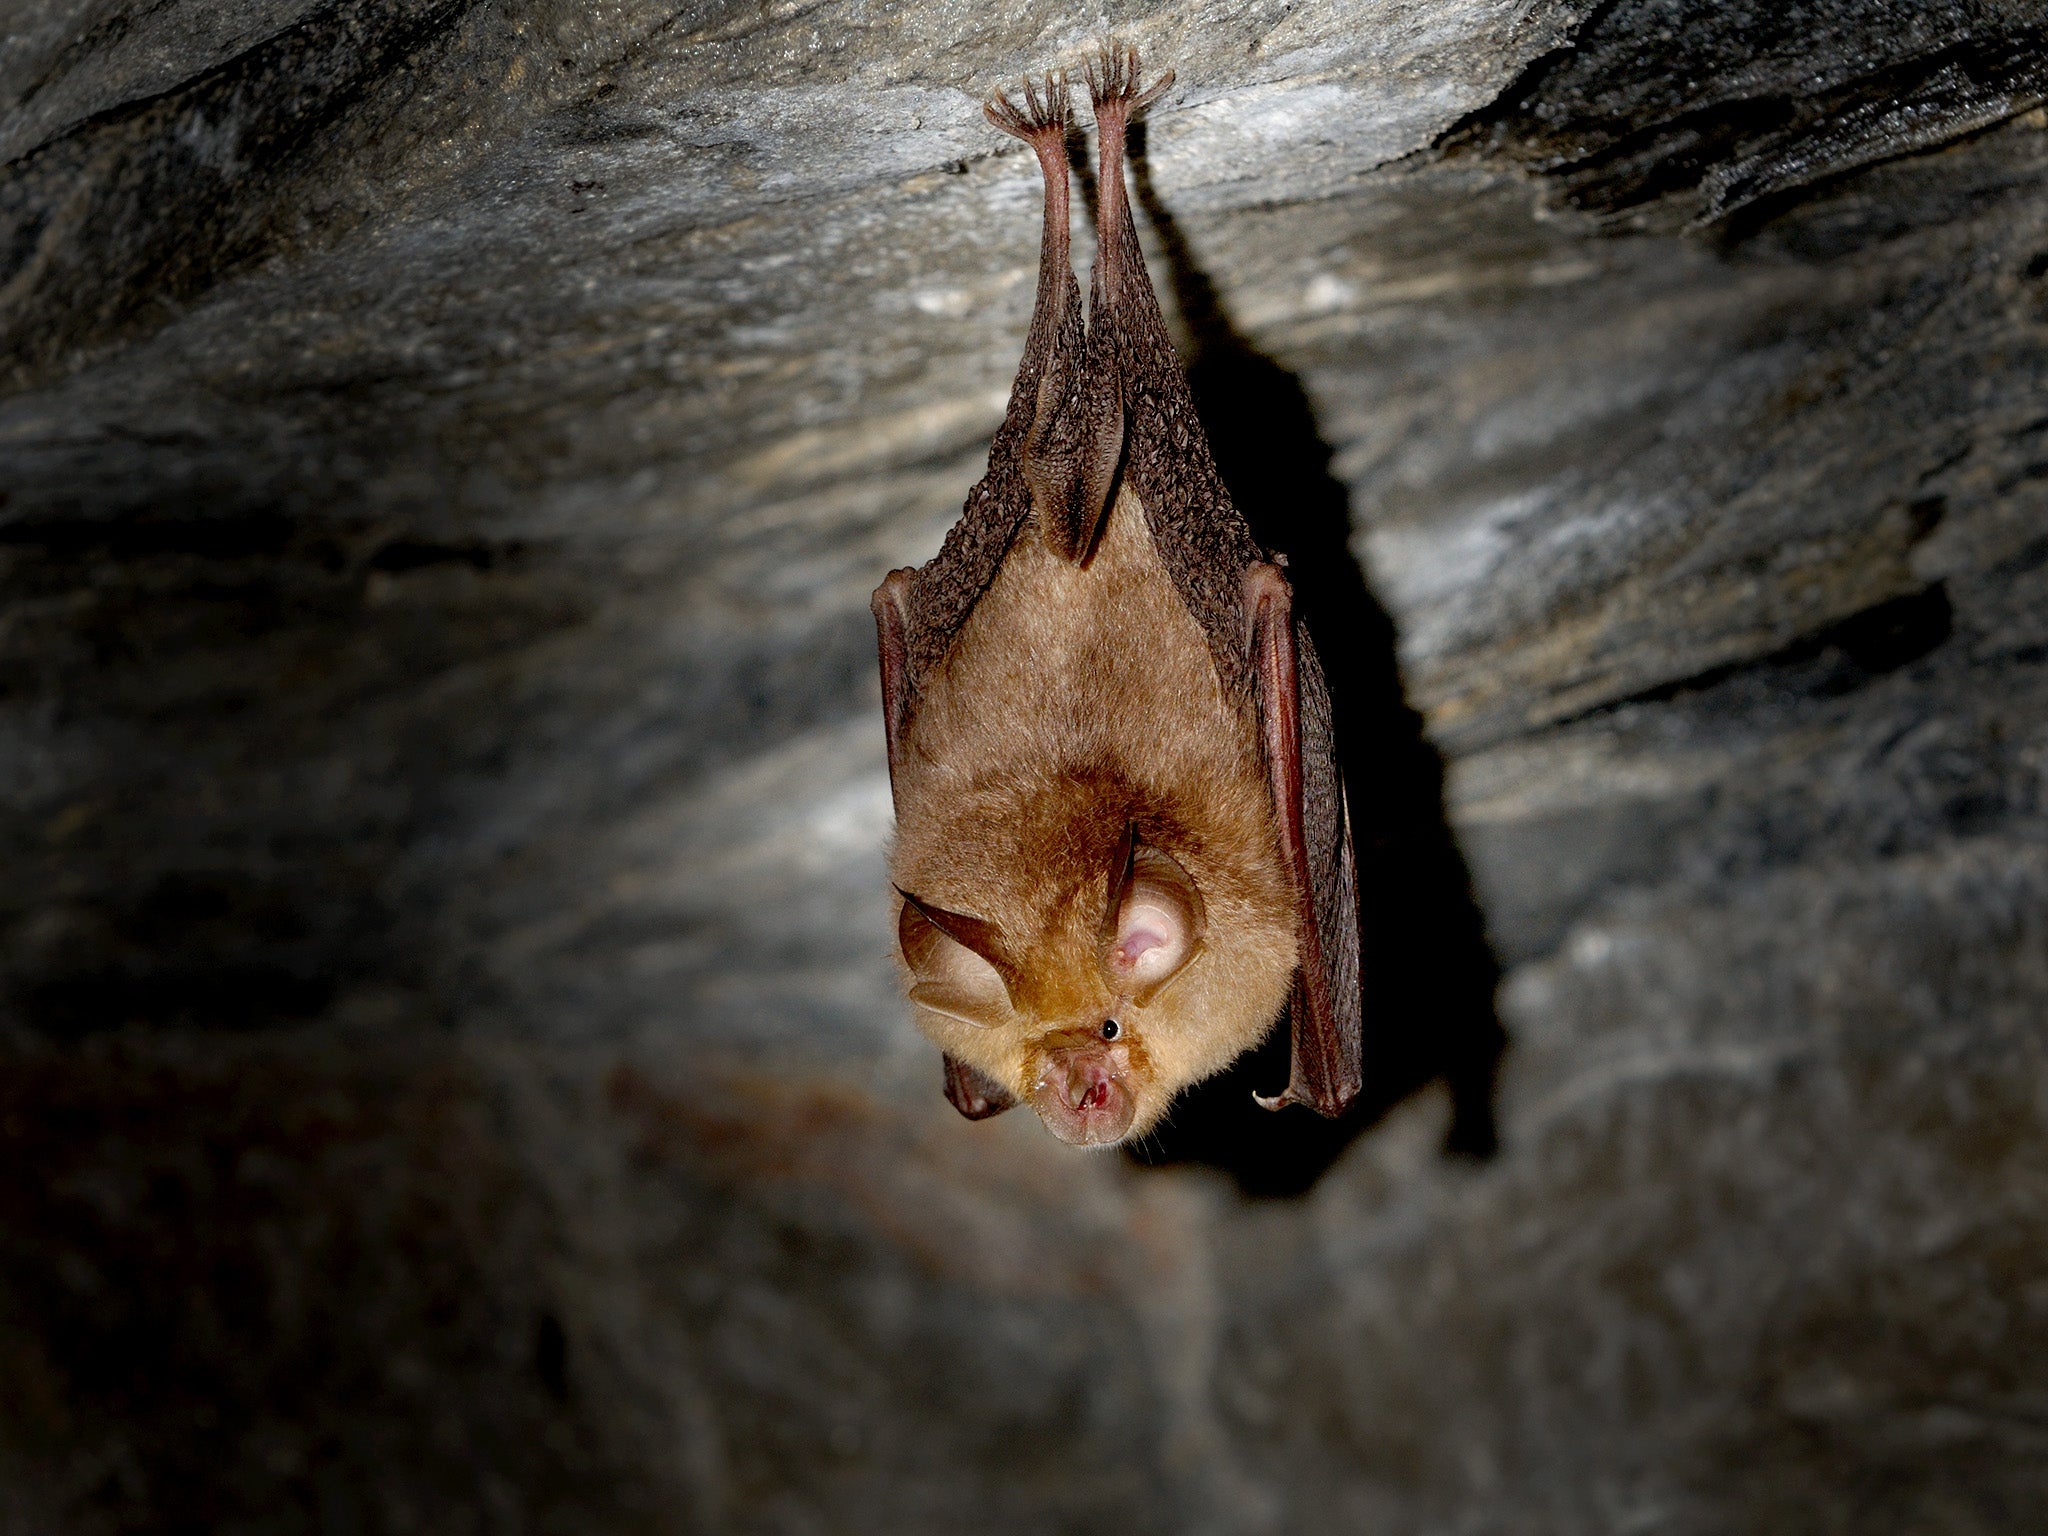 Sars-CoV-2 is thought to have first emerged in bats